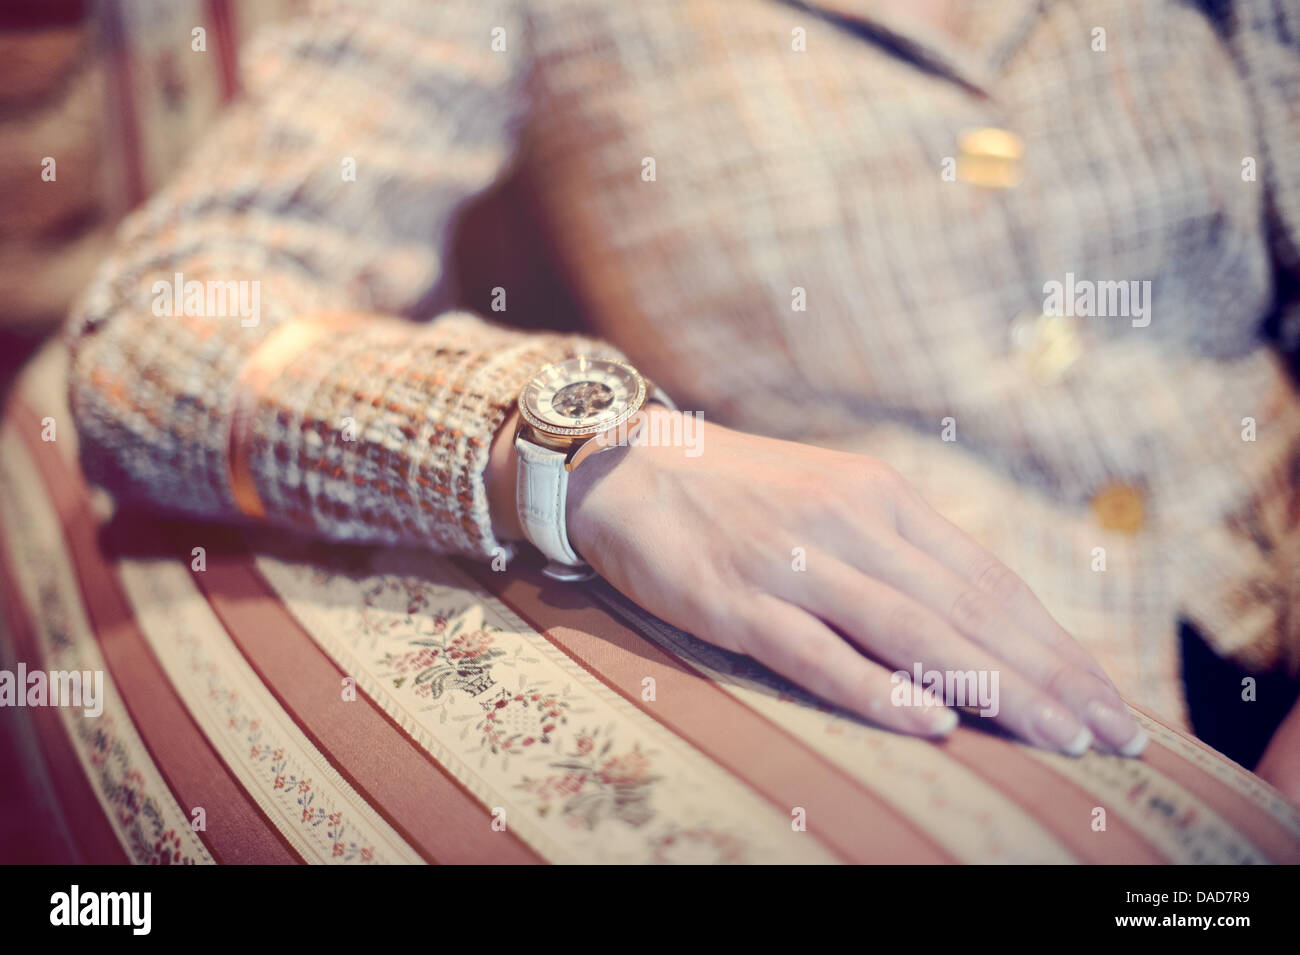 Luxury - Close up of woman's hand with a wrist watch Stock Photo